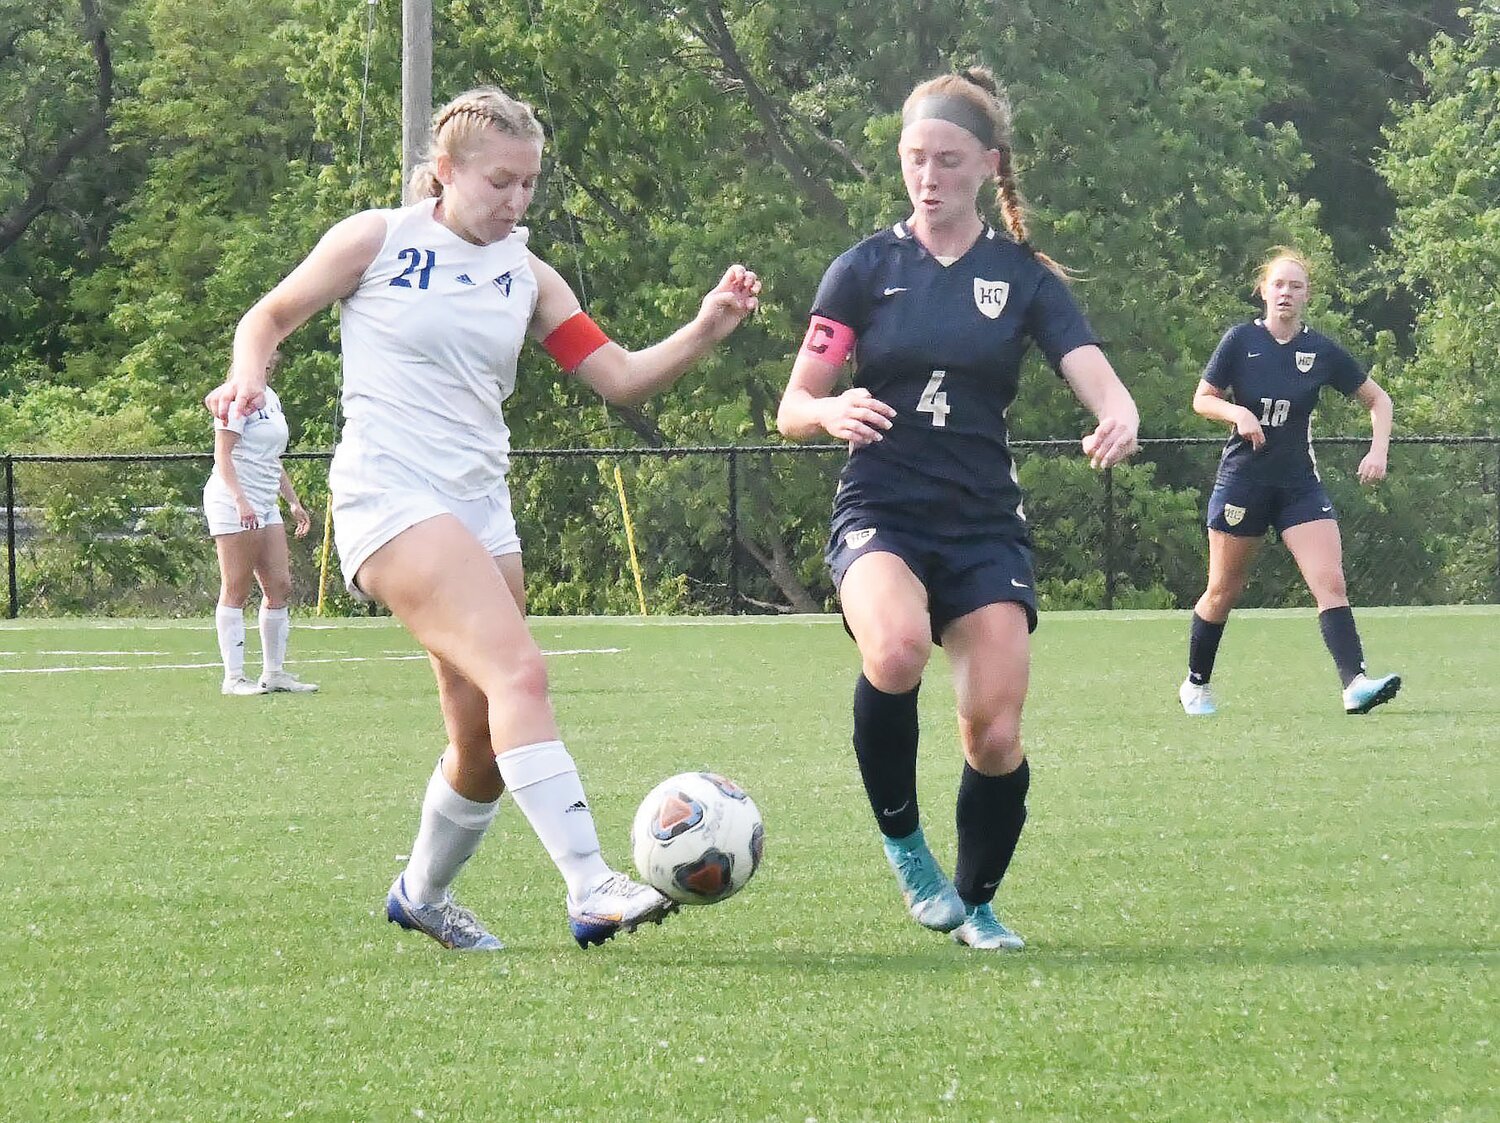 Moberly senior defender Macy White (left) played in her final scholastic soccer match on Wednesday, May 17, in Boonville.